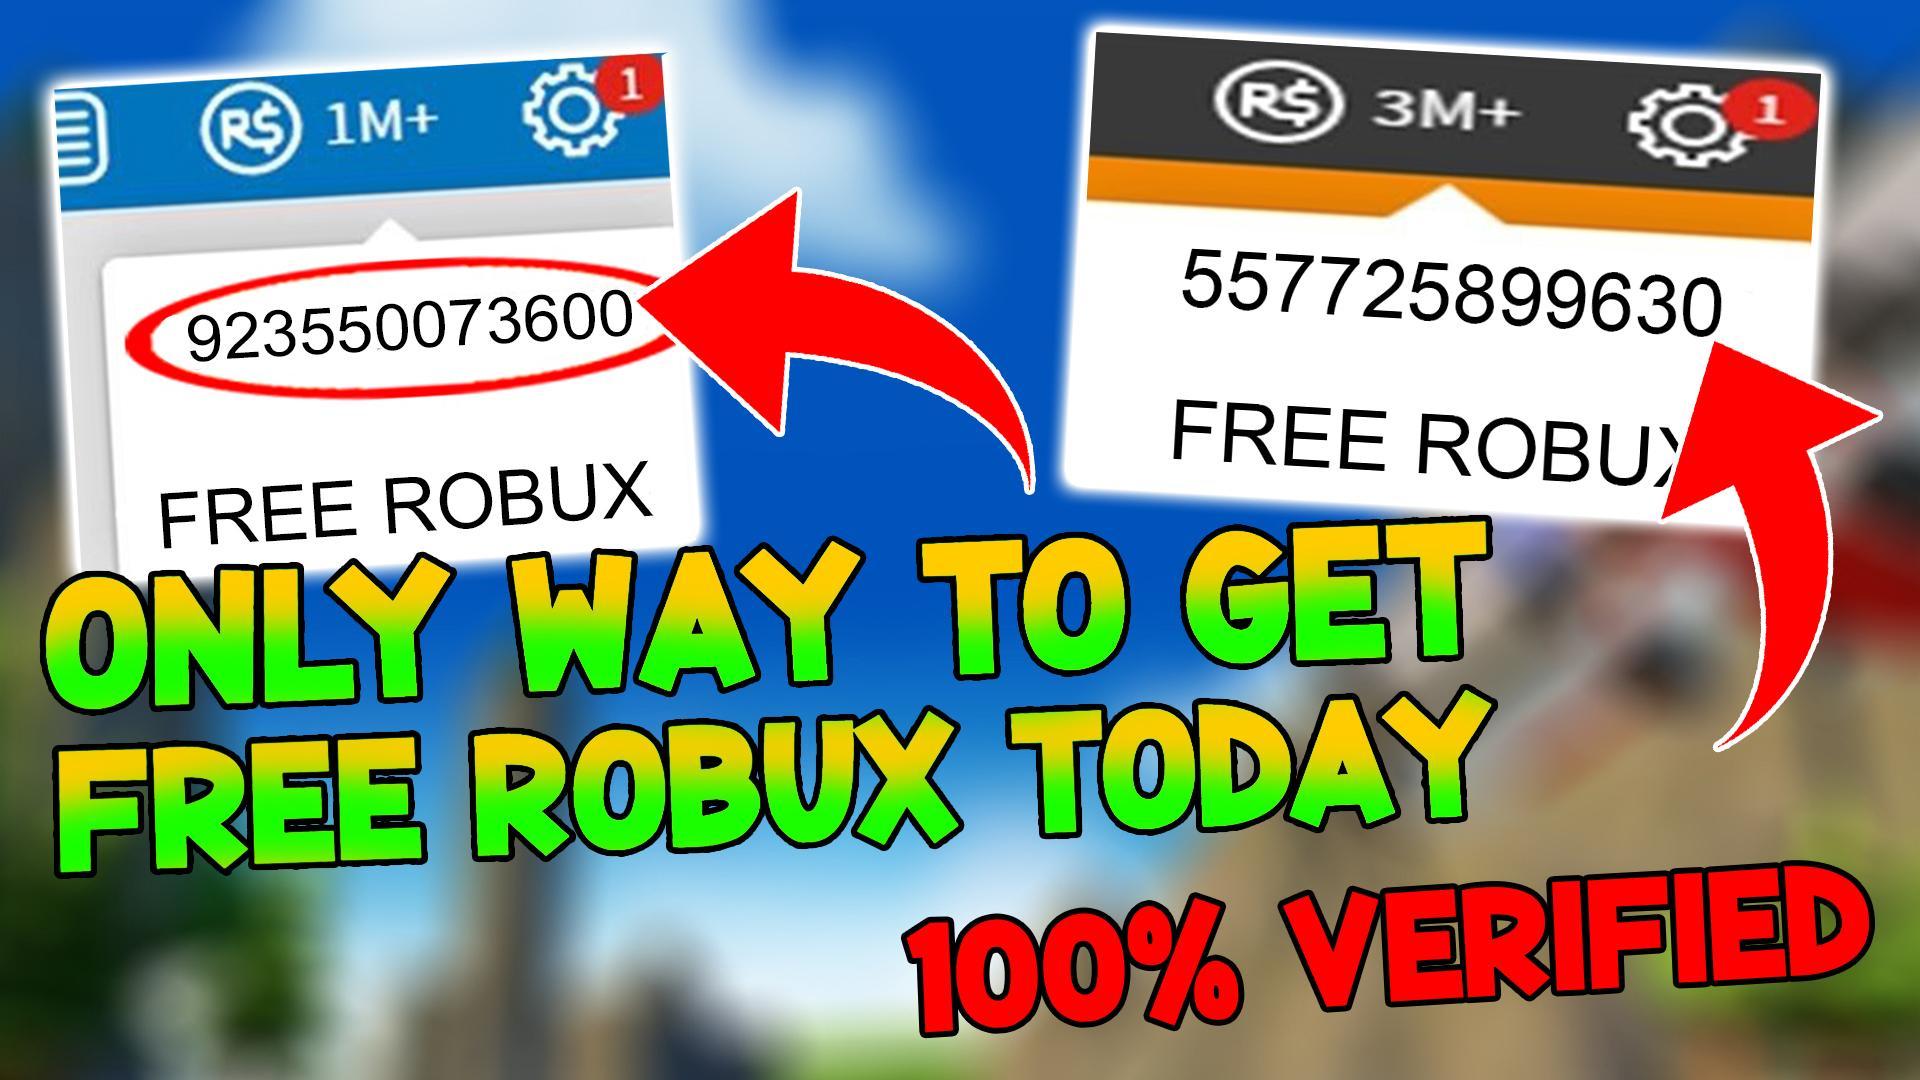 How To Get Unlimited Free Robux 2020 For Android Apk Download - how to get free robux faster